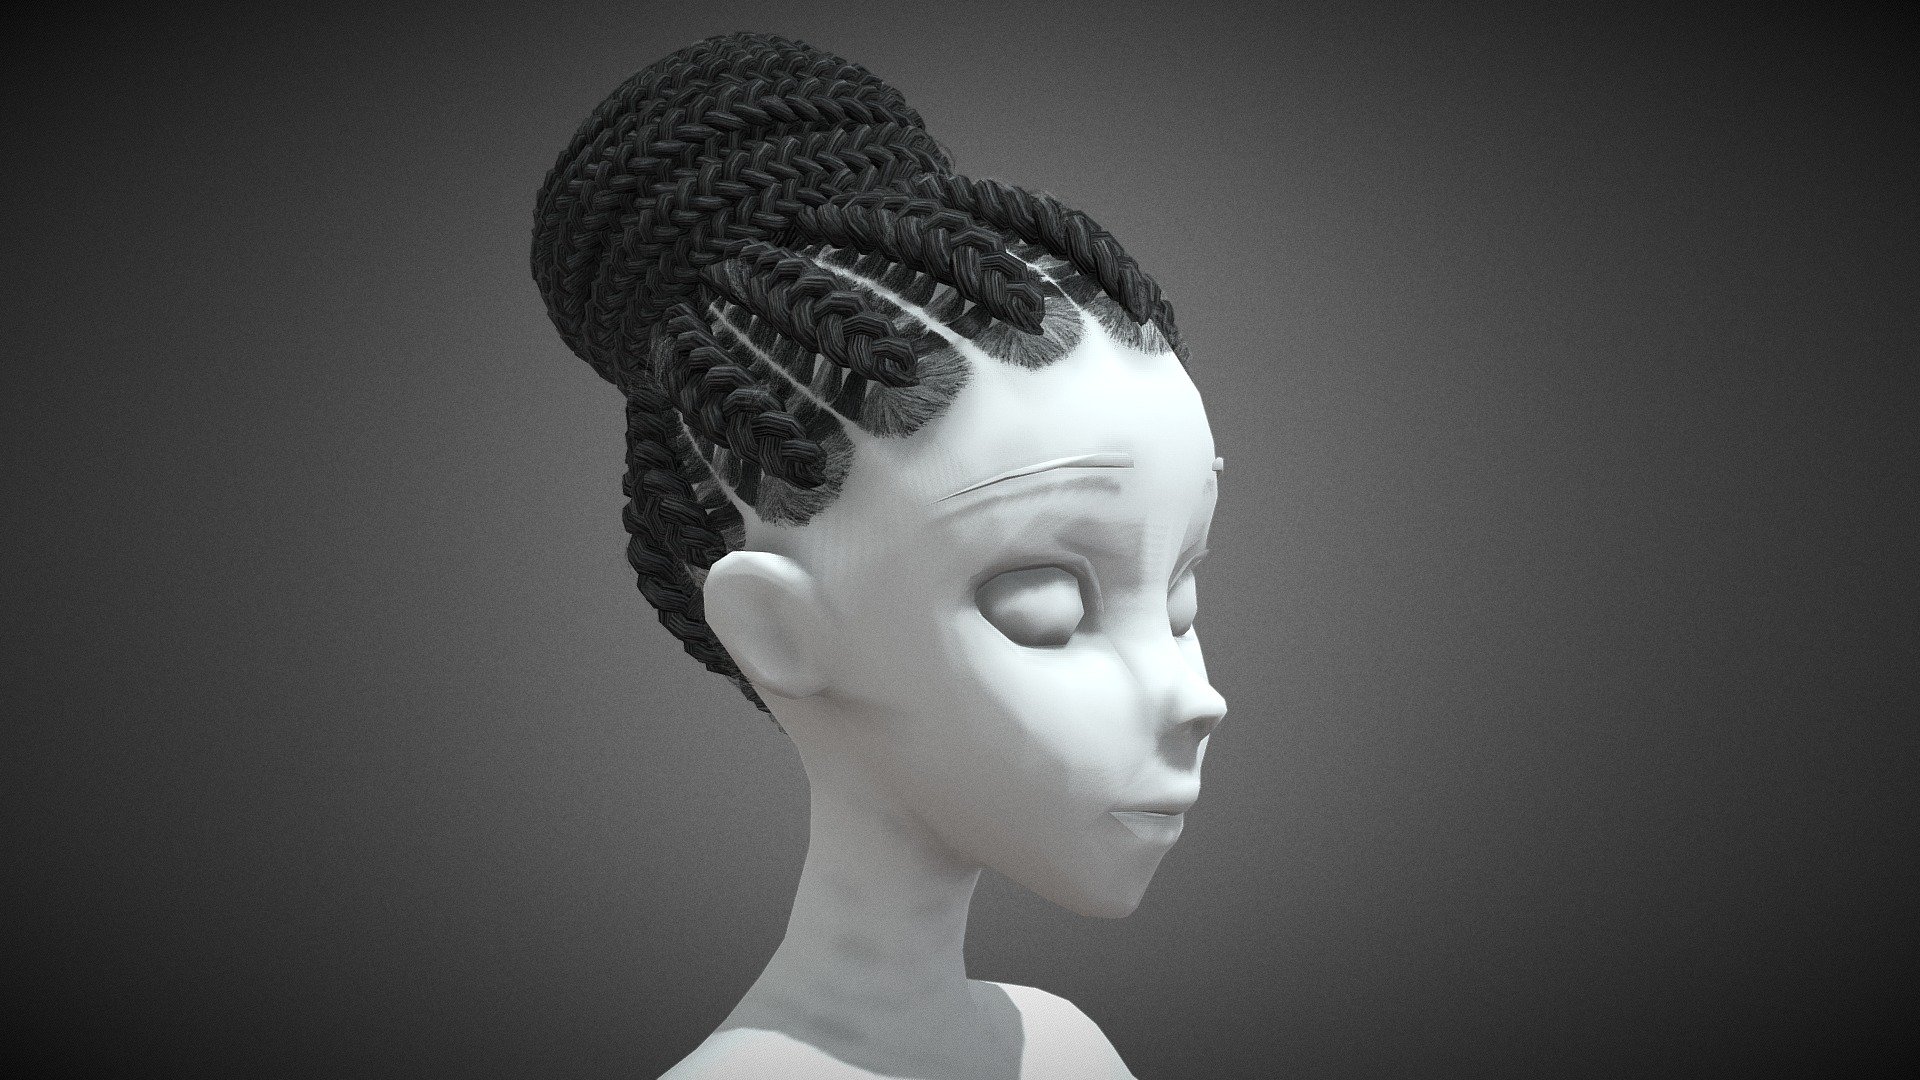 CG StudioX Present :
Female Hair Cards Style 6 - Braids Bun lowpoly/PBR


The photo been rendered using Marmoset Toolbag 4 (real time game engine )
The head model is decimated to show how the hair looks on the head.

Features :

Comes with Specular and Metalness PBR 4K texture .
Good topology.
Low polygon geometry.
The Model is prefect for game for both Specular workflow as in Unity and Metalness as in Unreal engine .
The model also rendered using Marmoset Toolbag 4 with both Specular and Metalness PBR and also included in the product with the full texture.
The texture can be easily adjustable .

Texture :

One set of UV for the Hair [Albedo -Normal-Metalness -Roughness-Gloss-Specular-Ao-Alpha-Depth-Direction-ID-Root] (4096*4096).

Files :
Marmoset Toolbag 4 ,Maya,,FBX,glTF,Blender,OBj with all the textures.


Contact me for if you have any questions.
 - Female Hair Cards Style 6 - Braids Bun - Buy Royalty Free 3D model by CG StudioX (@CG_StudioX) 3d model